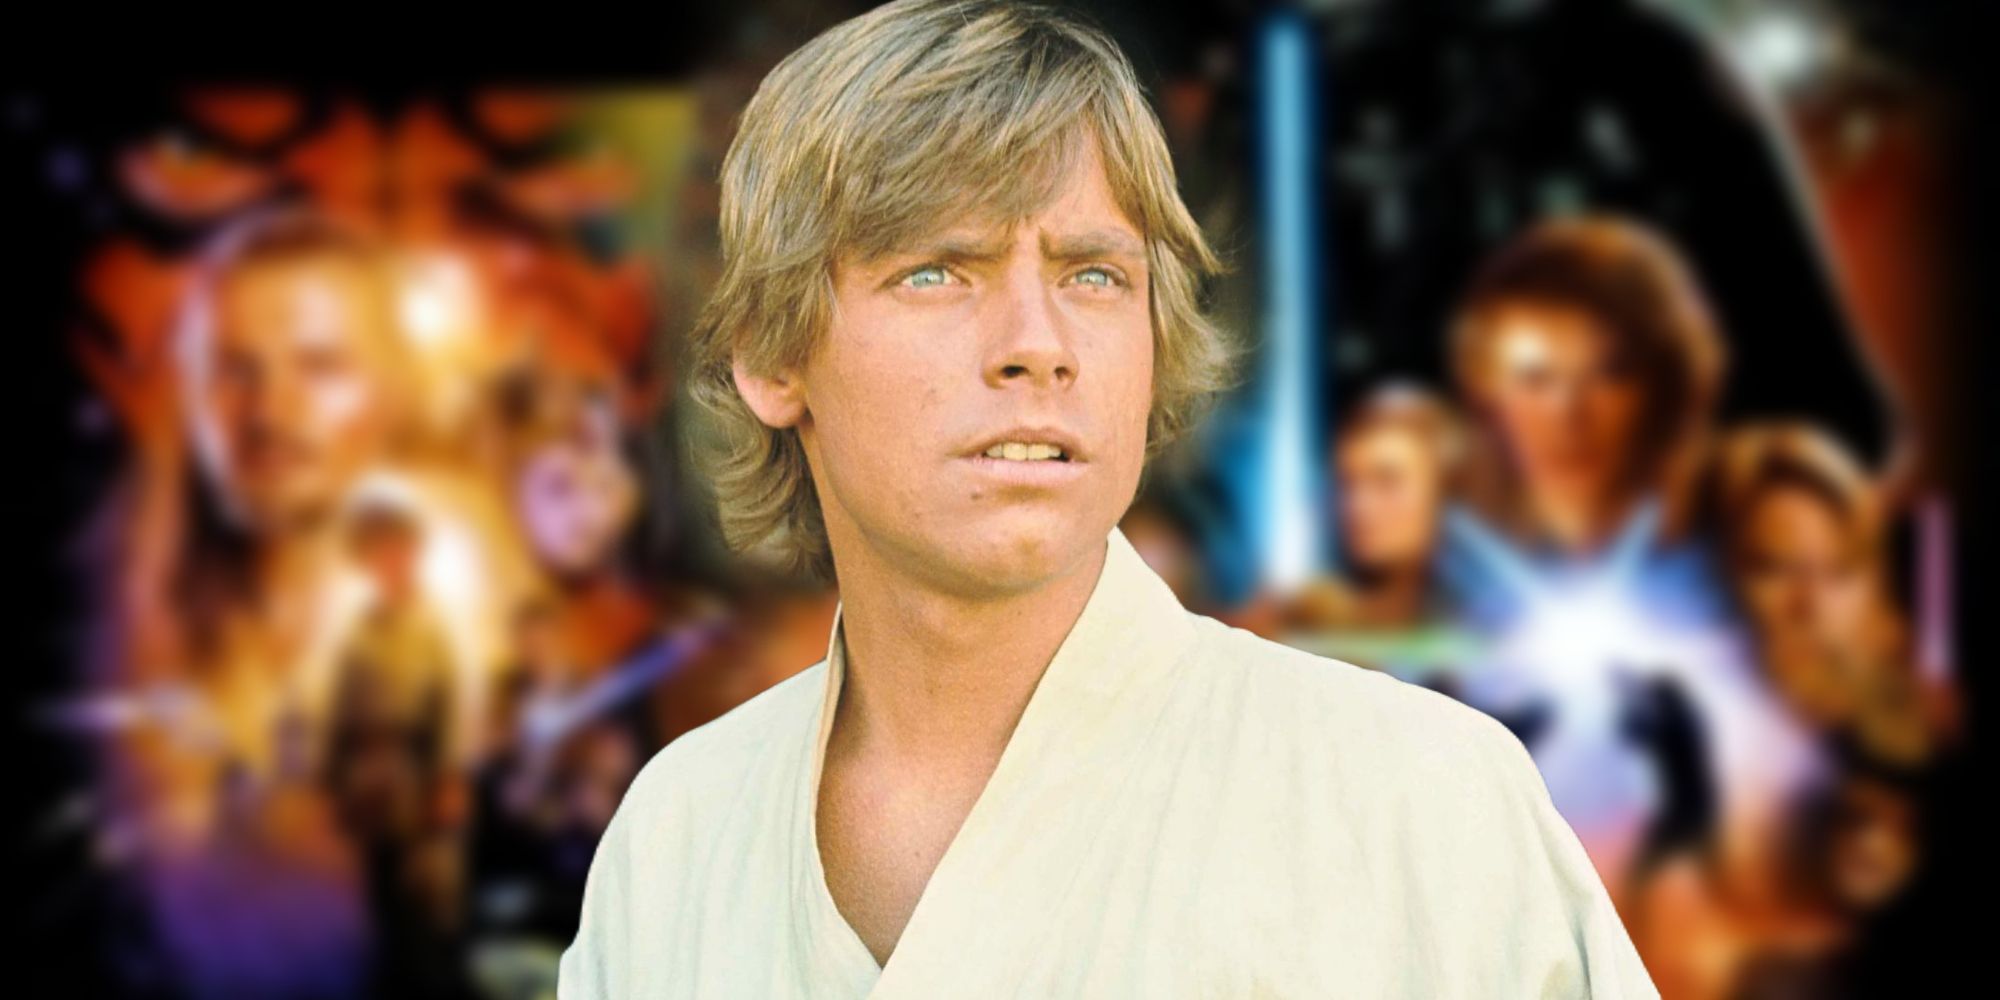 A blurred image of the Star Wars prequel posters behind Luke Skywalker from A New Hope